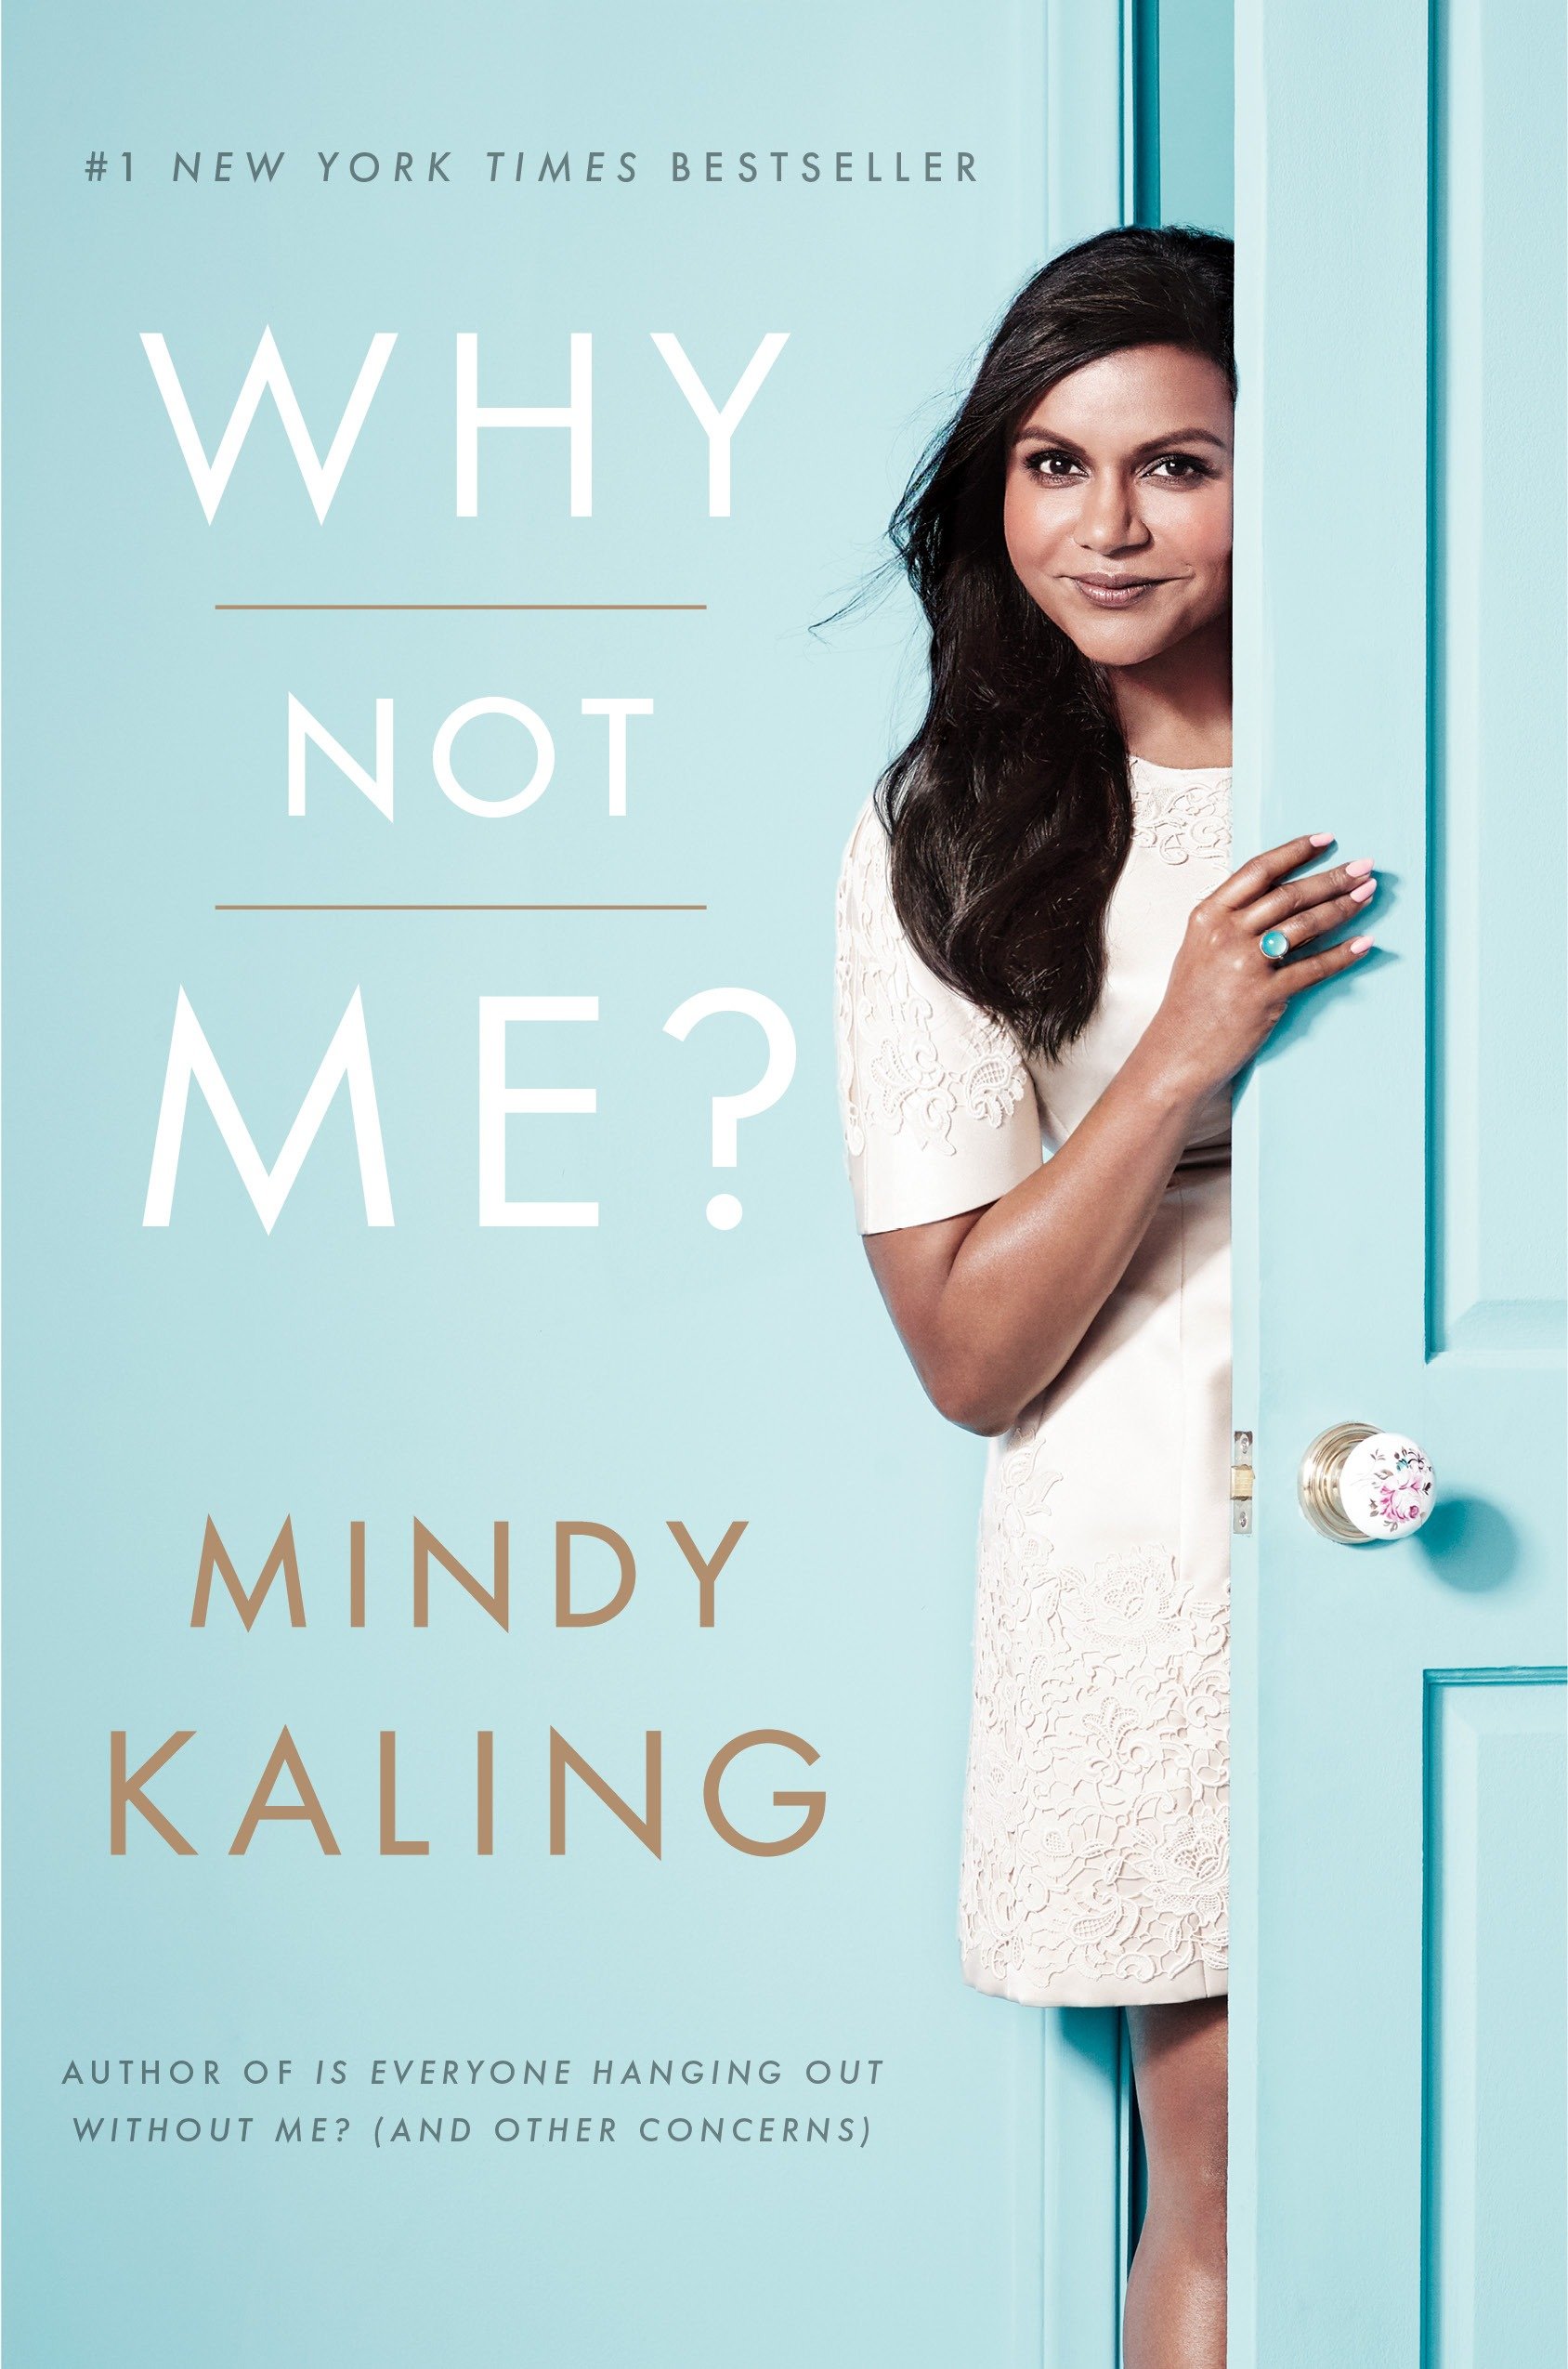 Why not me? cover image